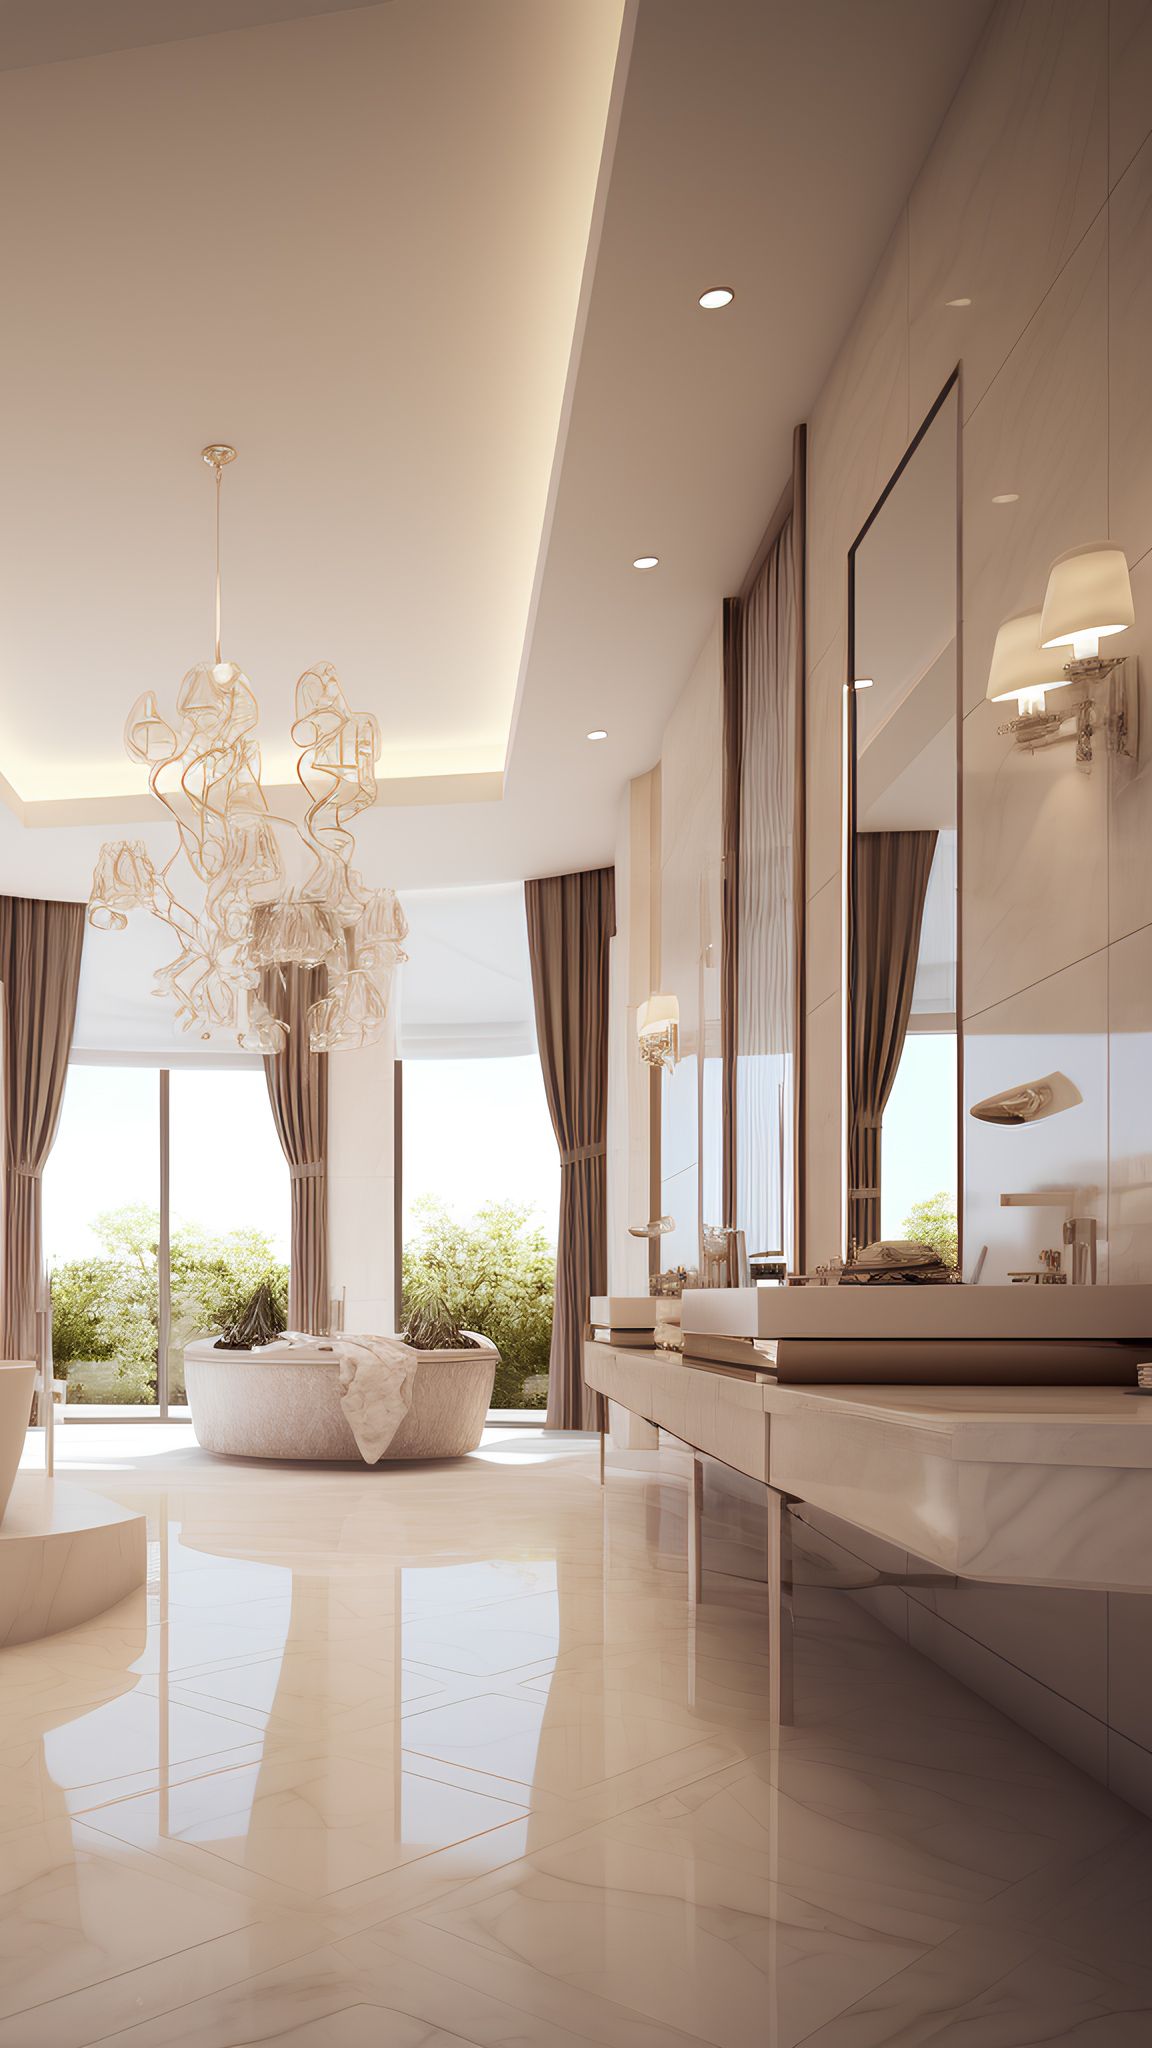 Exquisite Contemporary Master Bathrooms: A Touch of Luxury